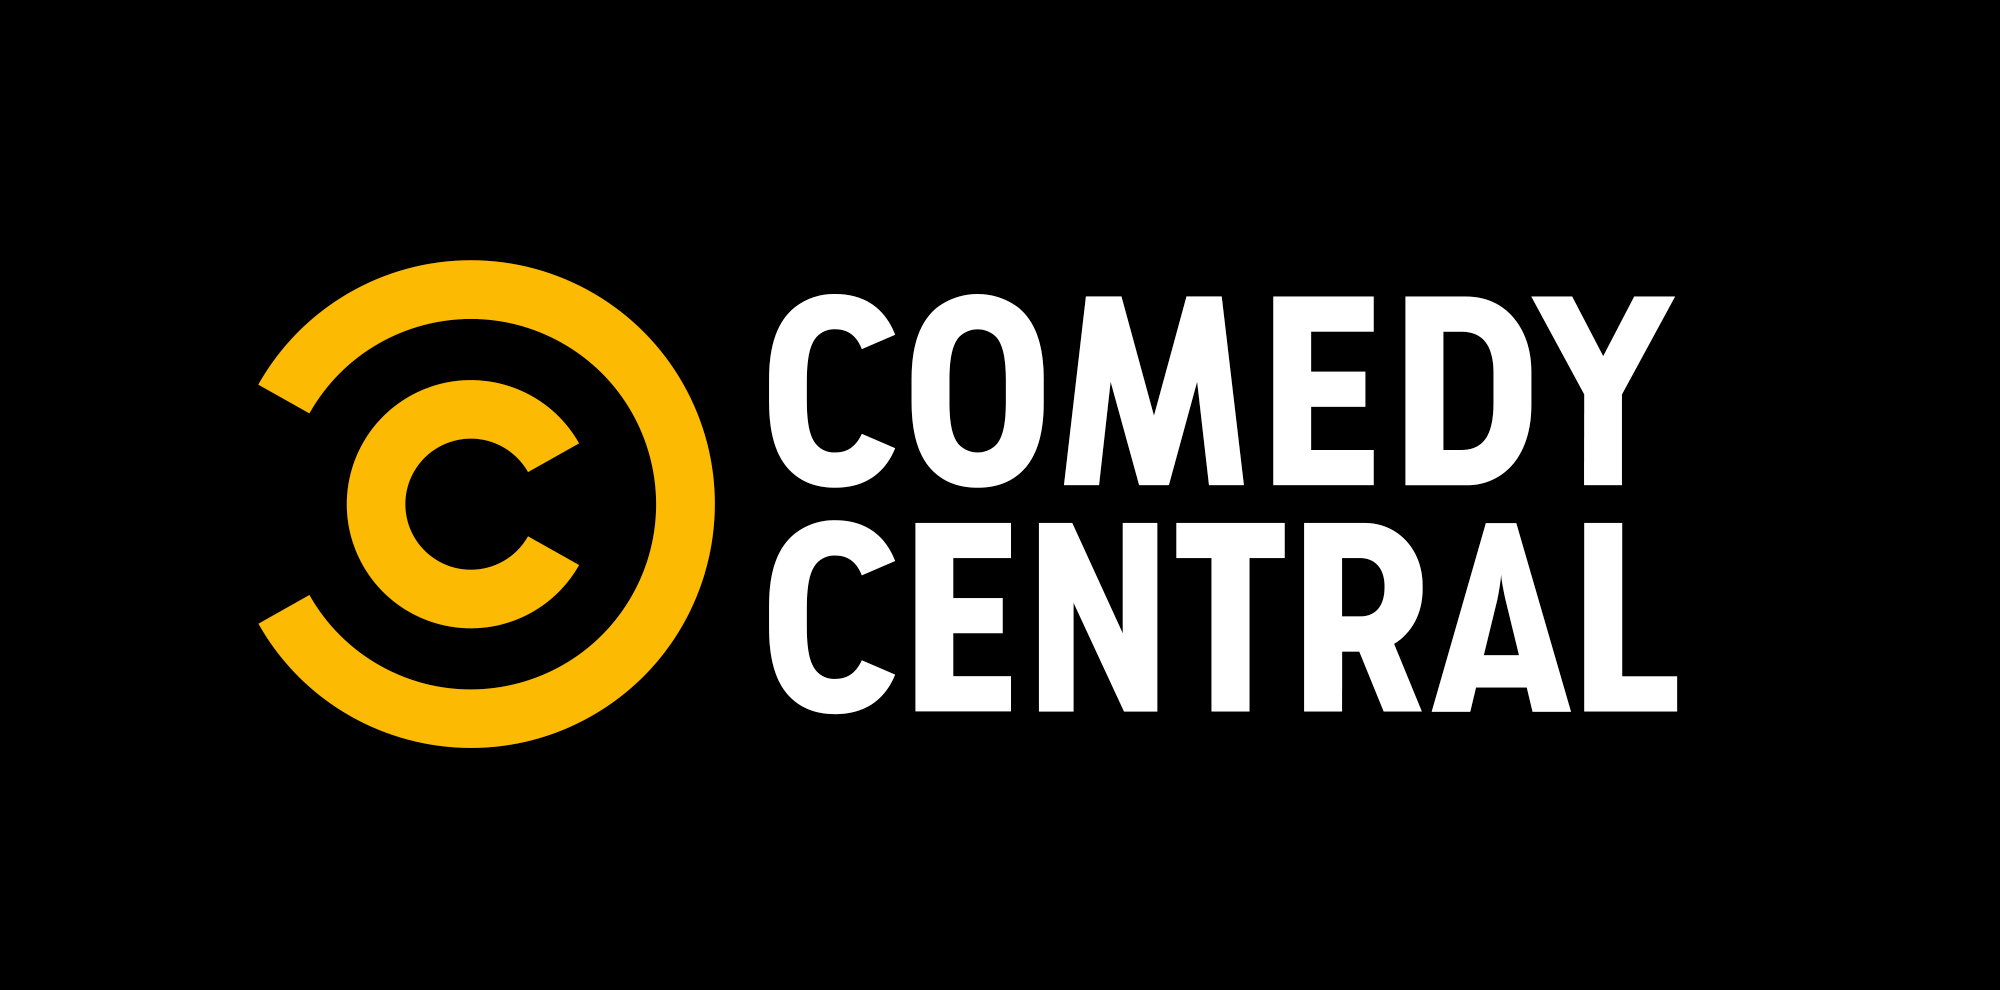 Comedy Central Logo - Brand New: New Logo and On-air Look for Comedy Central by ...